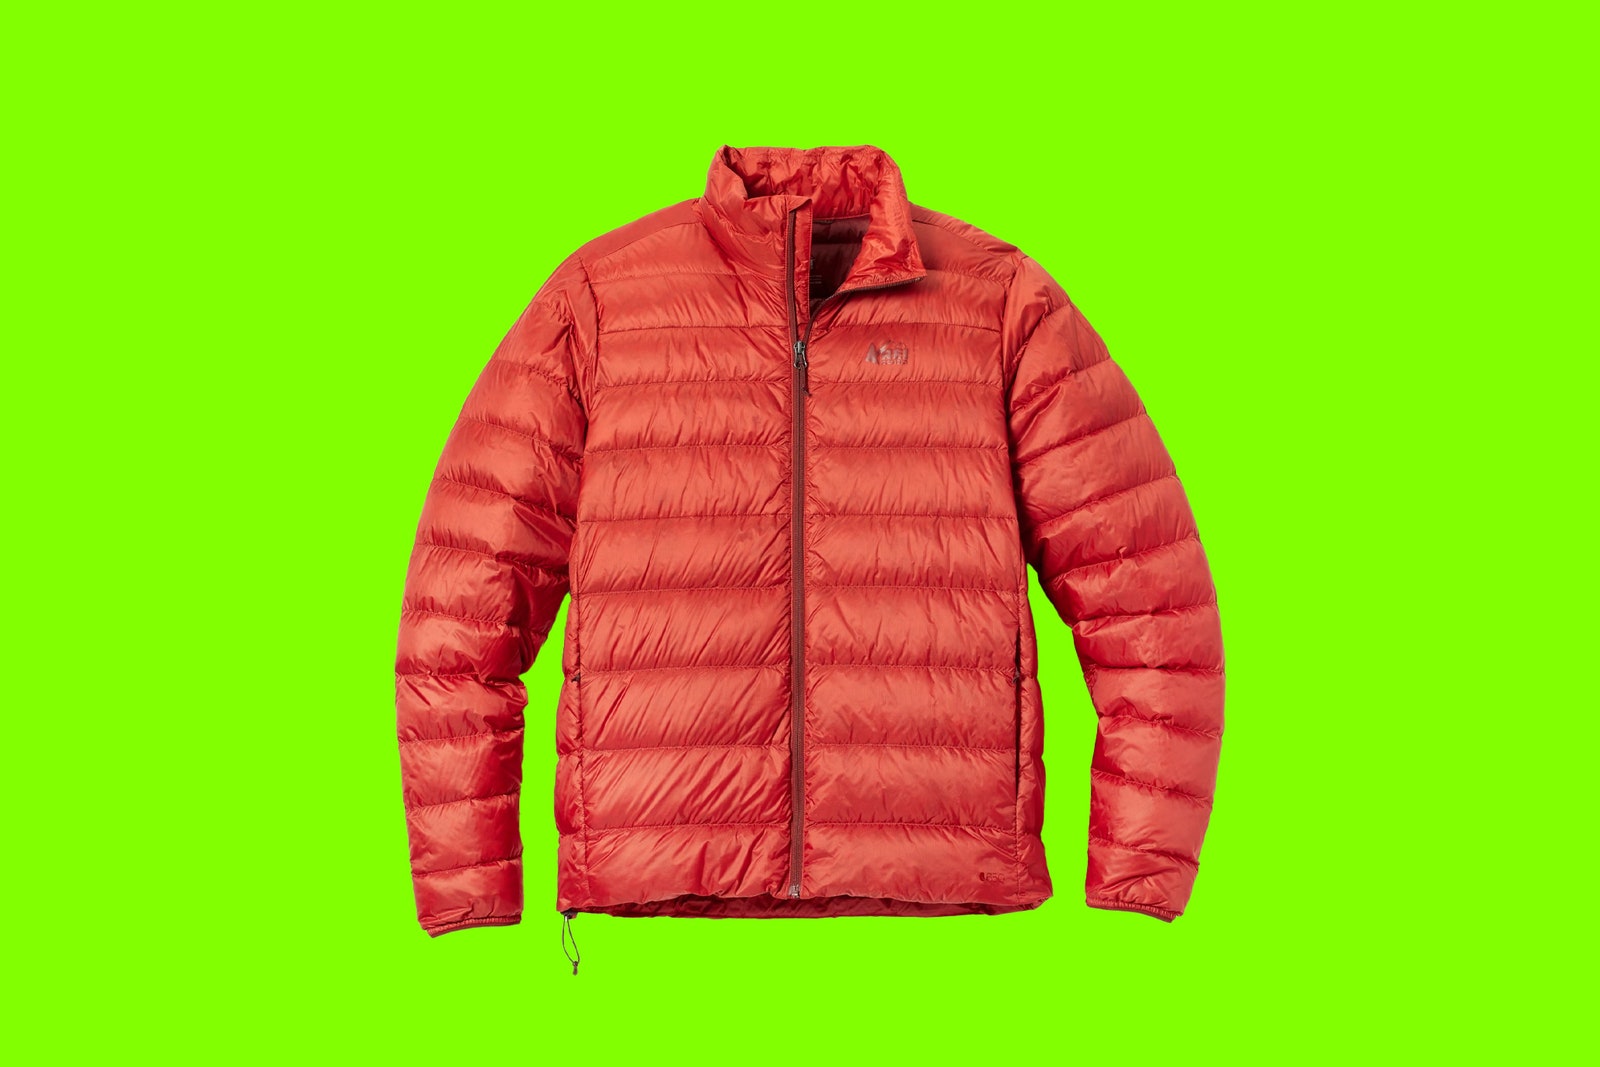 REI Co-op Makes the Best Value Down Jacket